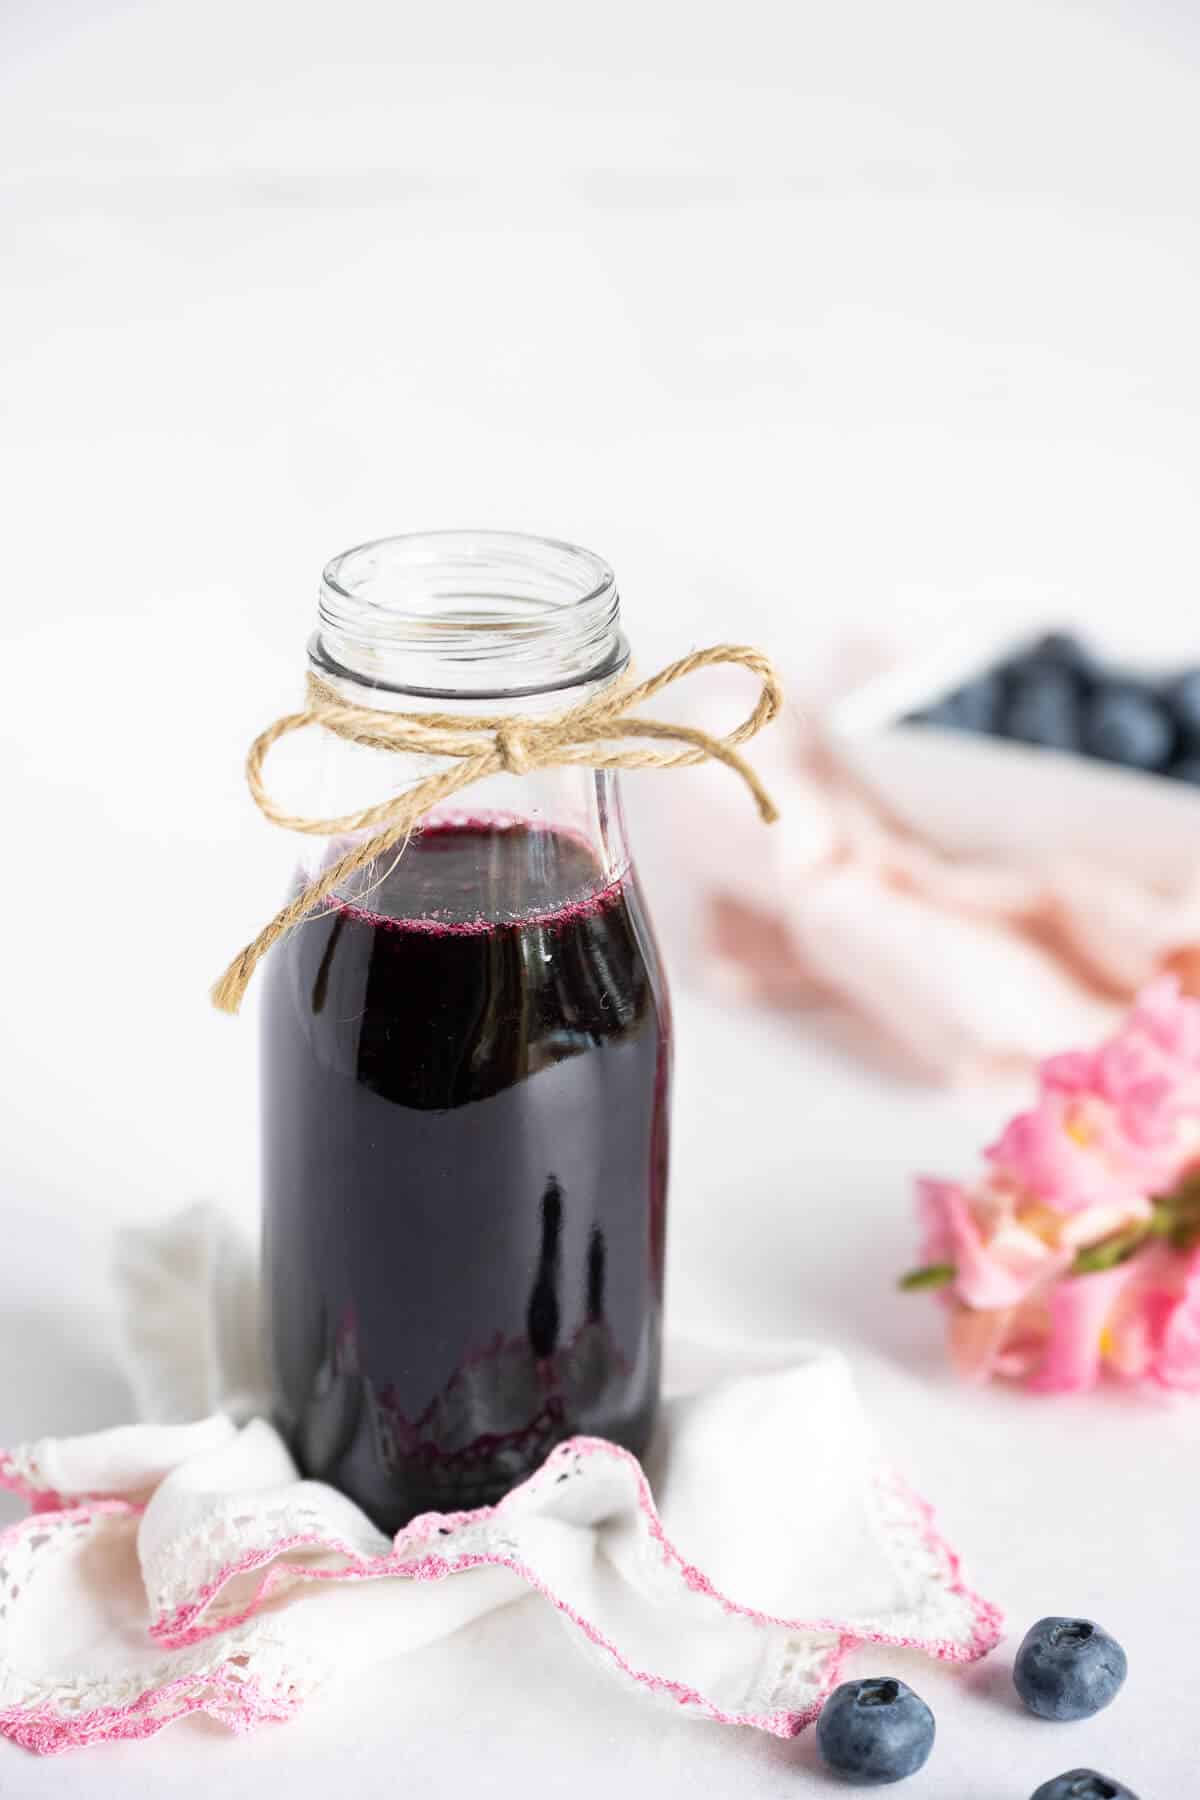 Blueberry simple syrup in a glass jar. Bowl of blueberries in the background, fresh flowers along side.